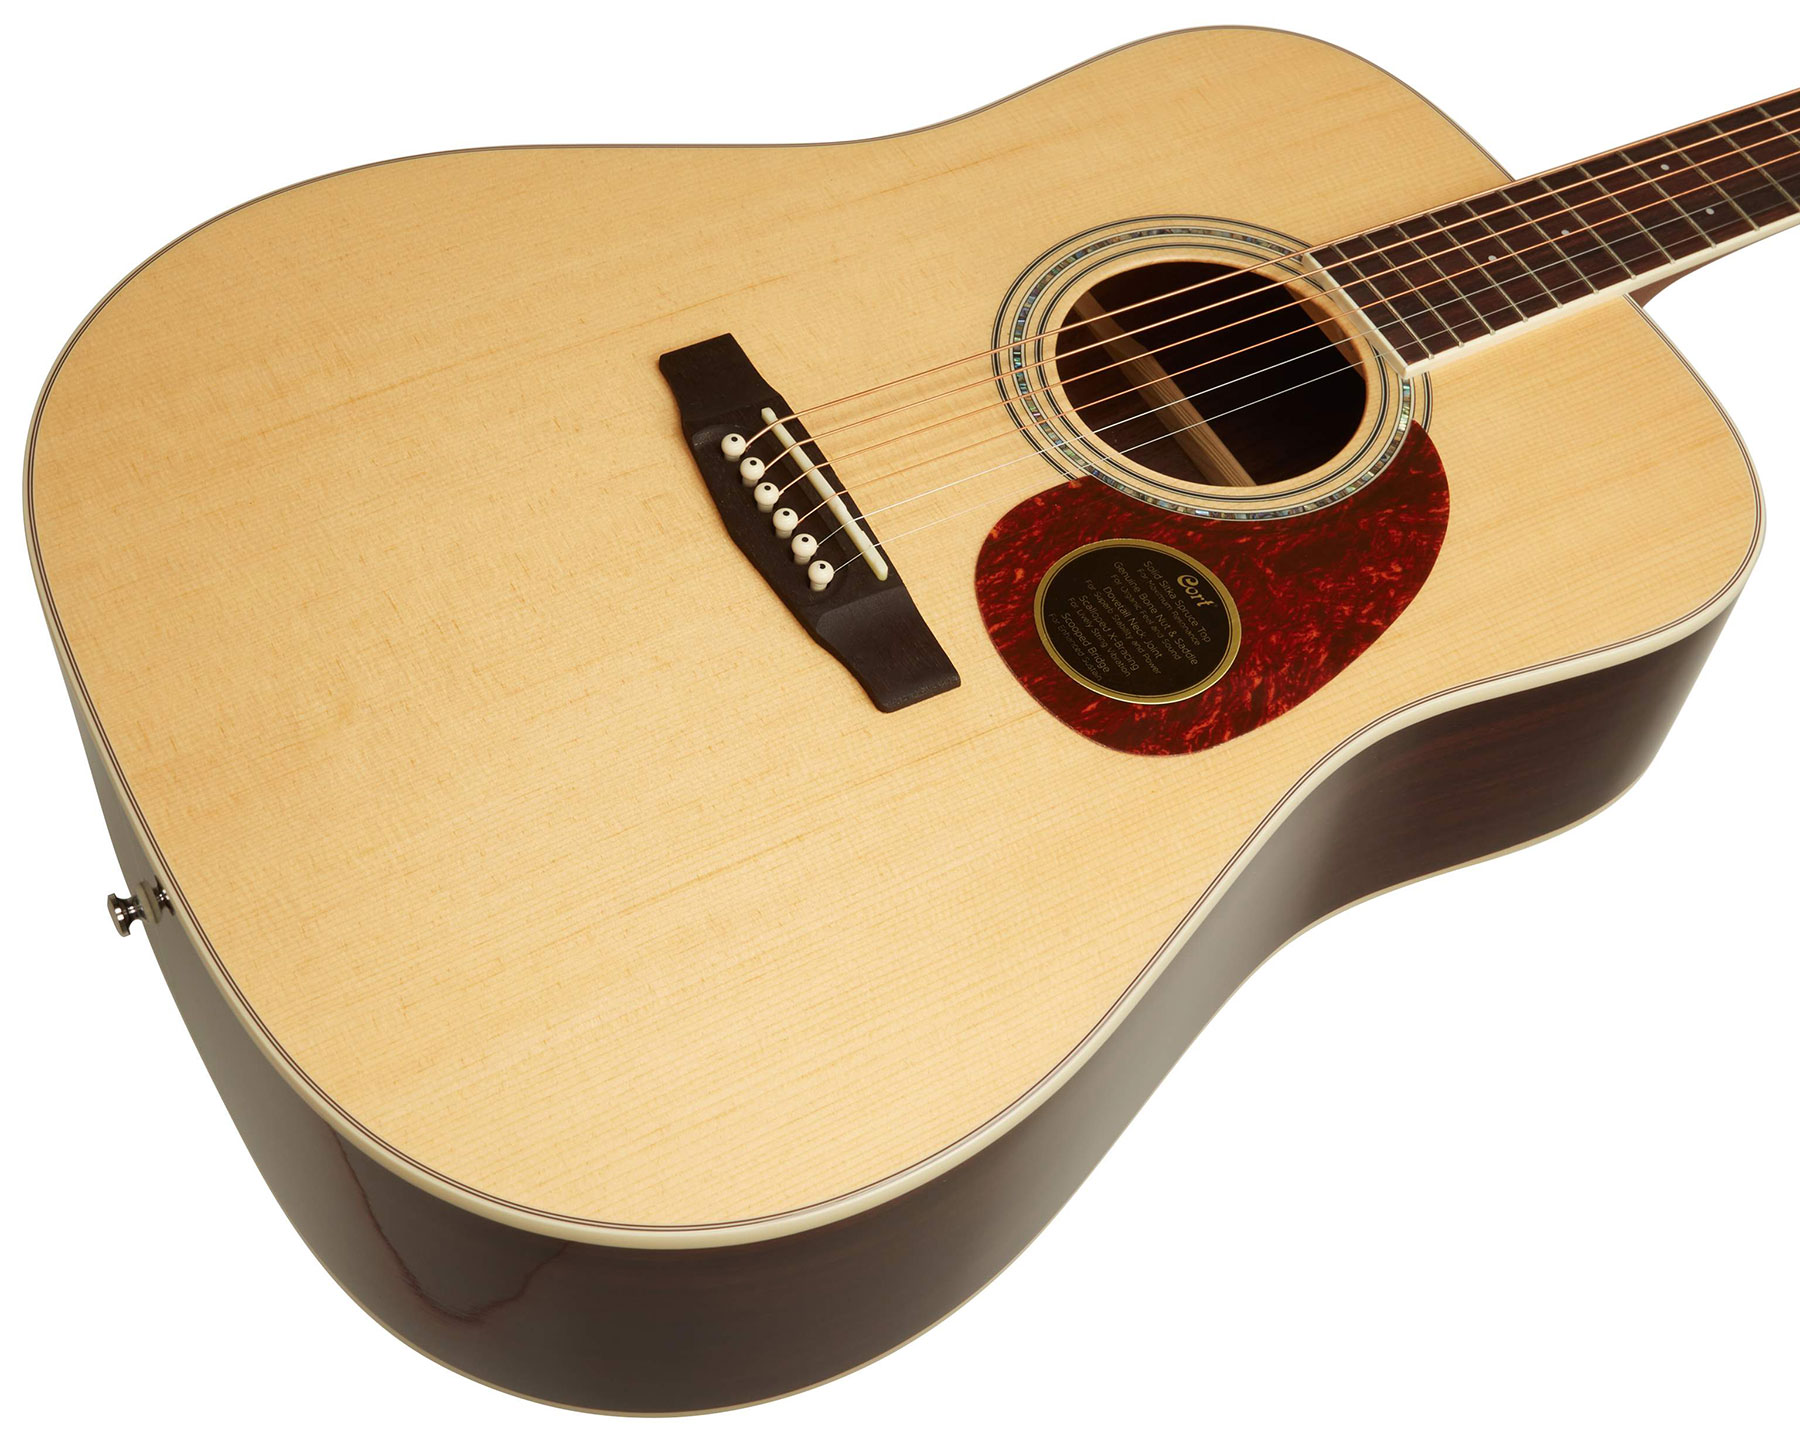 Cort Earth 100 Rosewood Dreadnought Epicea Palissandre Ova - Natural Glossy - Guitarra acústica & electro - Variation 2